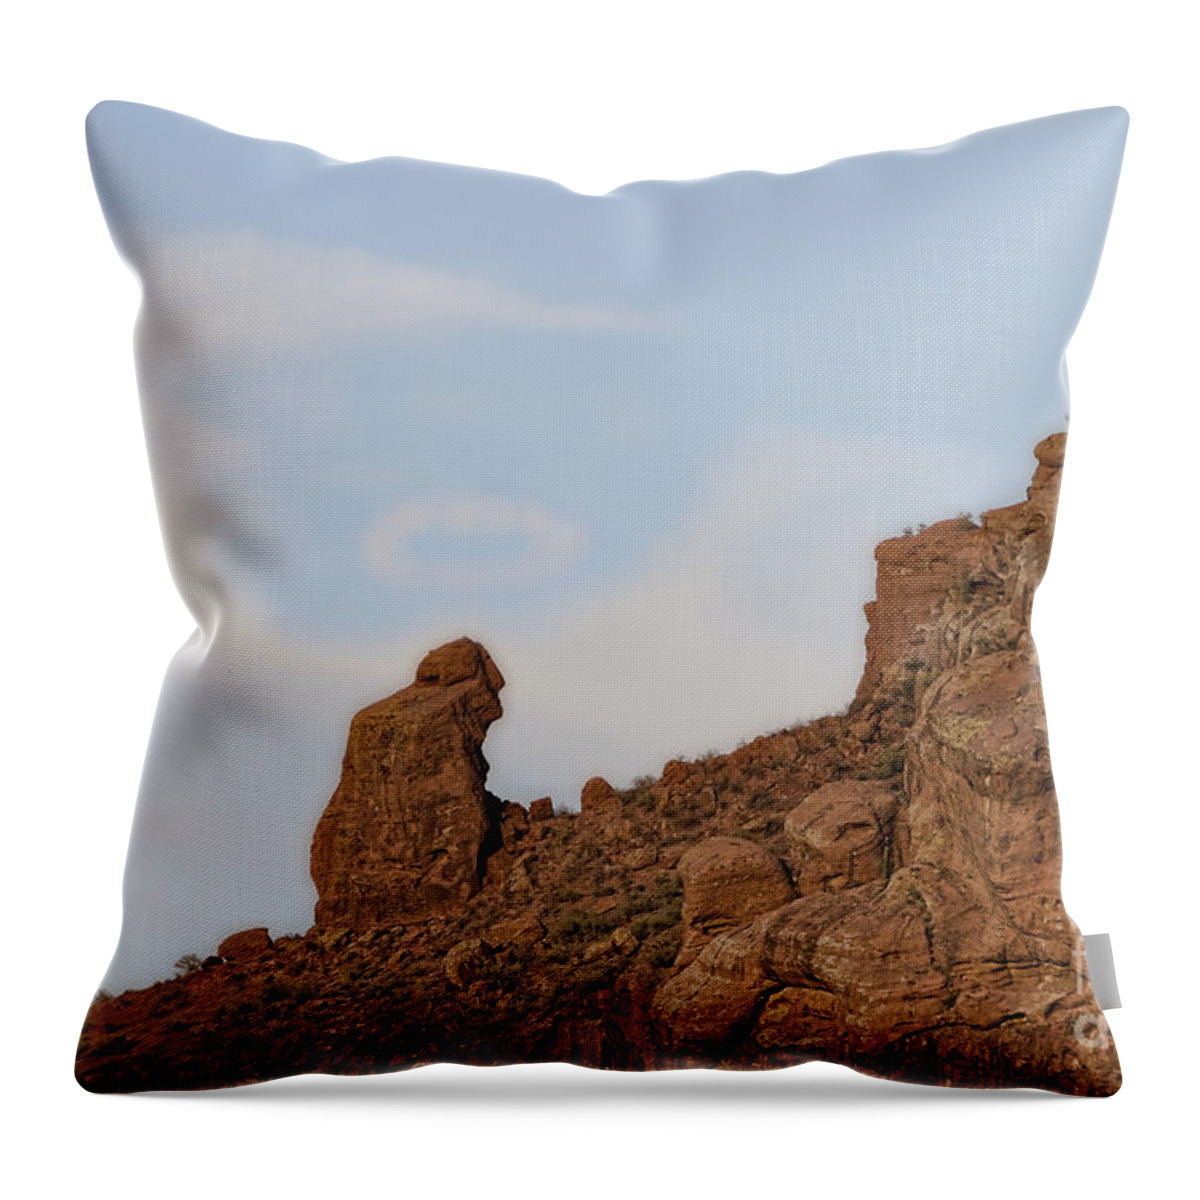 'praying Monk' Throw Pillow featuring the photograph Praying Monk with Halo Camelback Mountain by James BO Insogna